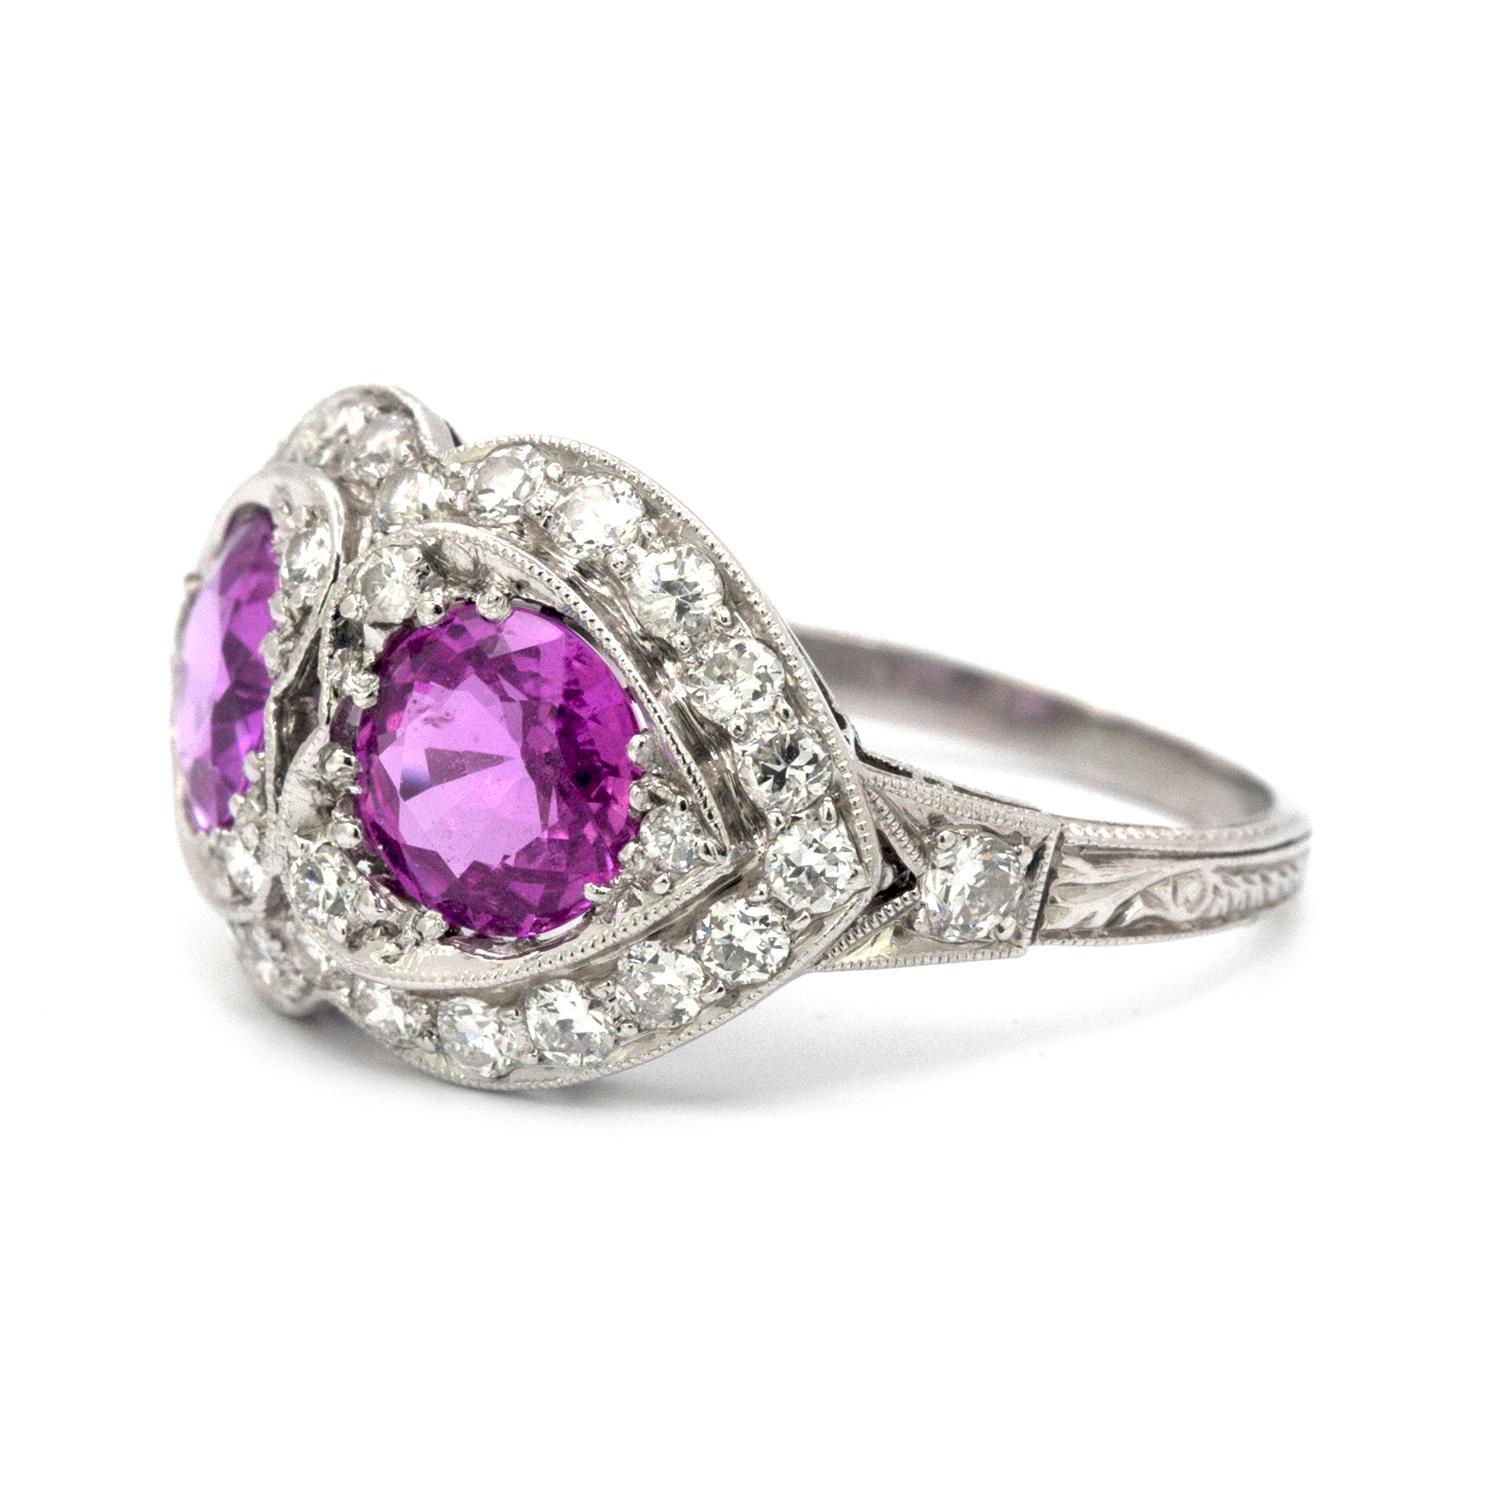 Pink Sapphire and Diamond, Art Deco style 18k white gold ring that features 2 round Pink Sapphires, each measuring 6.5 mm and have a total weight of 2.45 cts. The pink sapphires are beautifully offset by 32 rbc clean white diamonds that measure 1.7